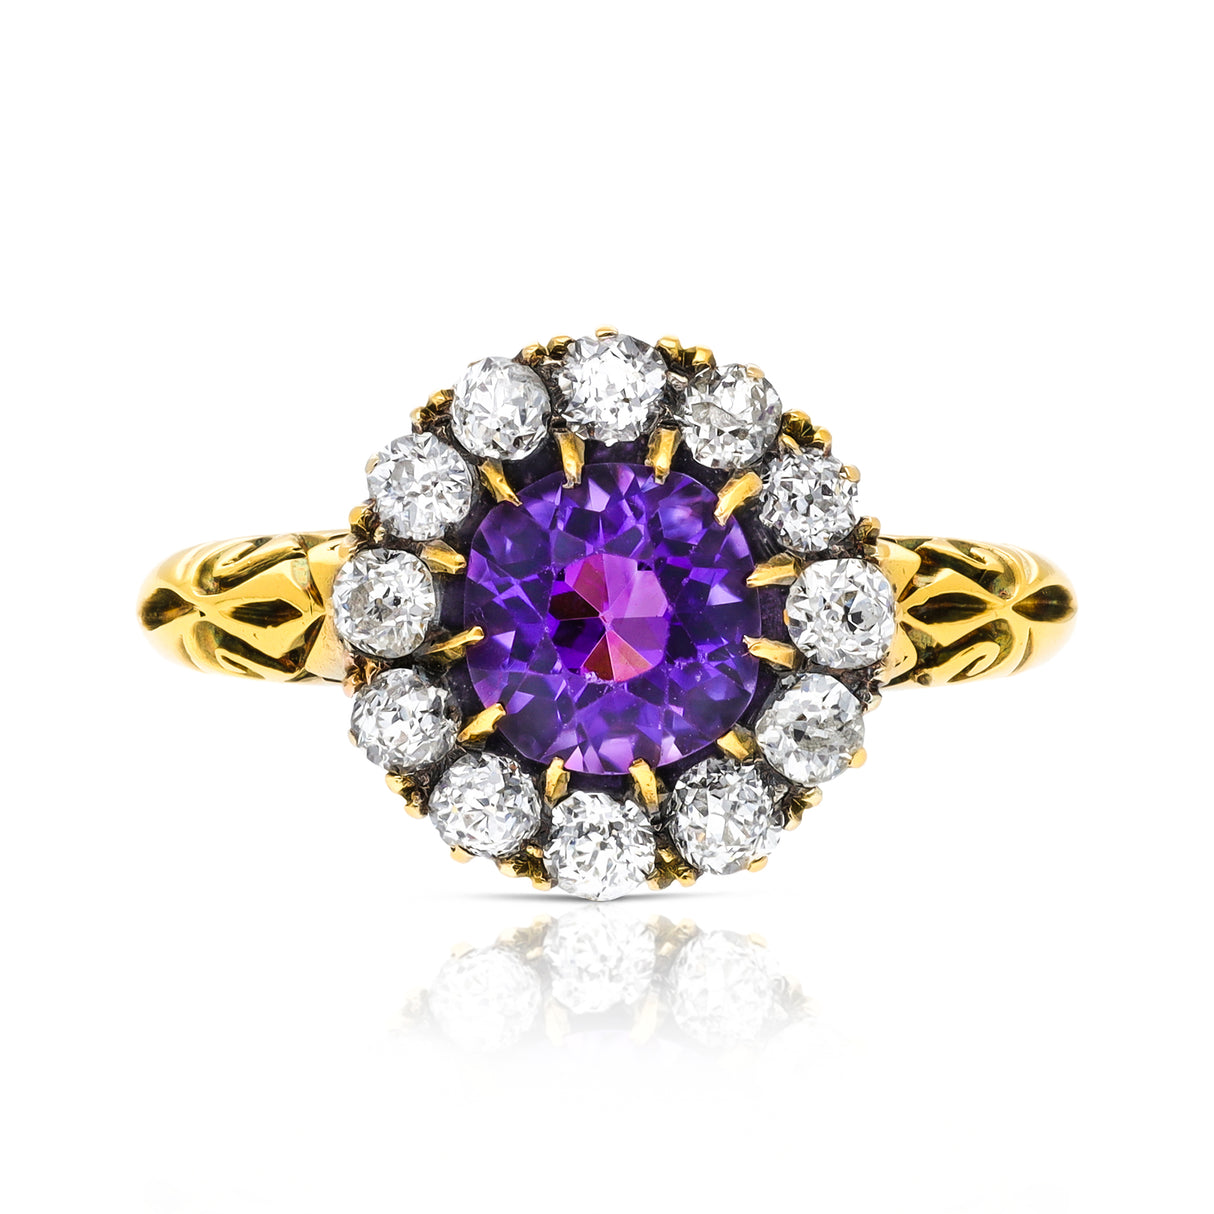 Antique, Amethyst and Diamond Cluster Ring, 18ct Yellow Gold